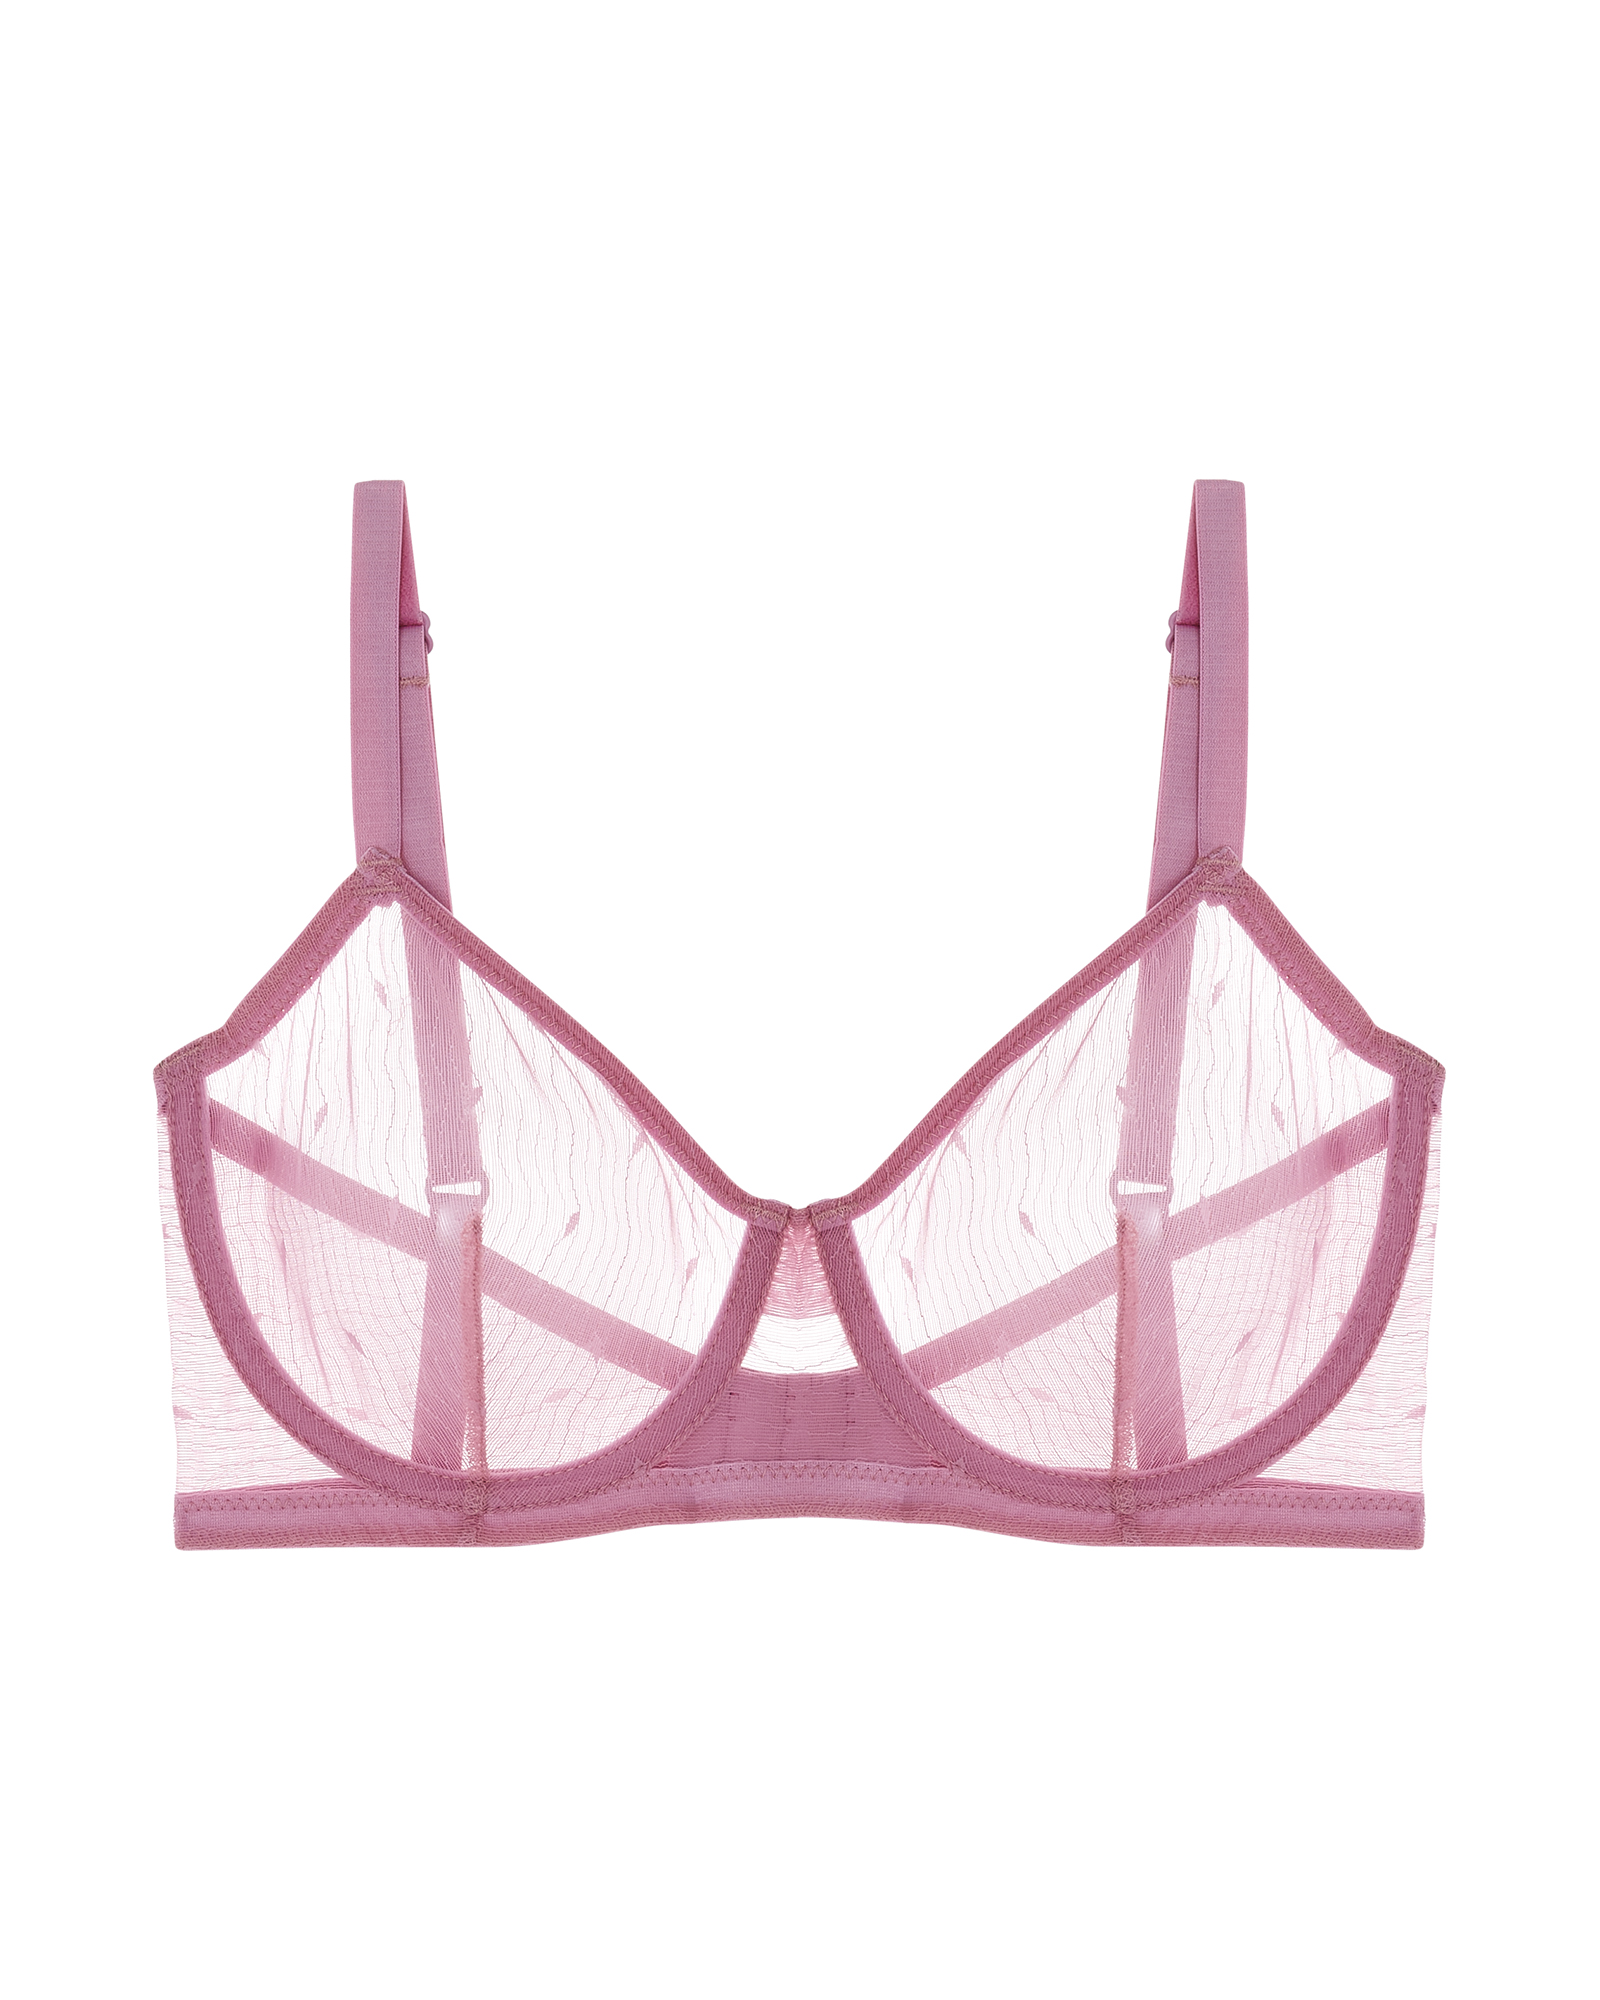 Else Kate Underwire Br